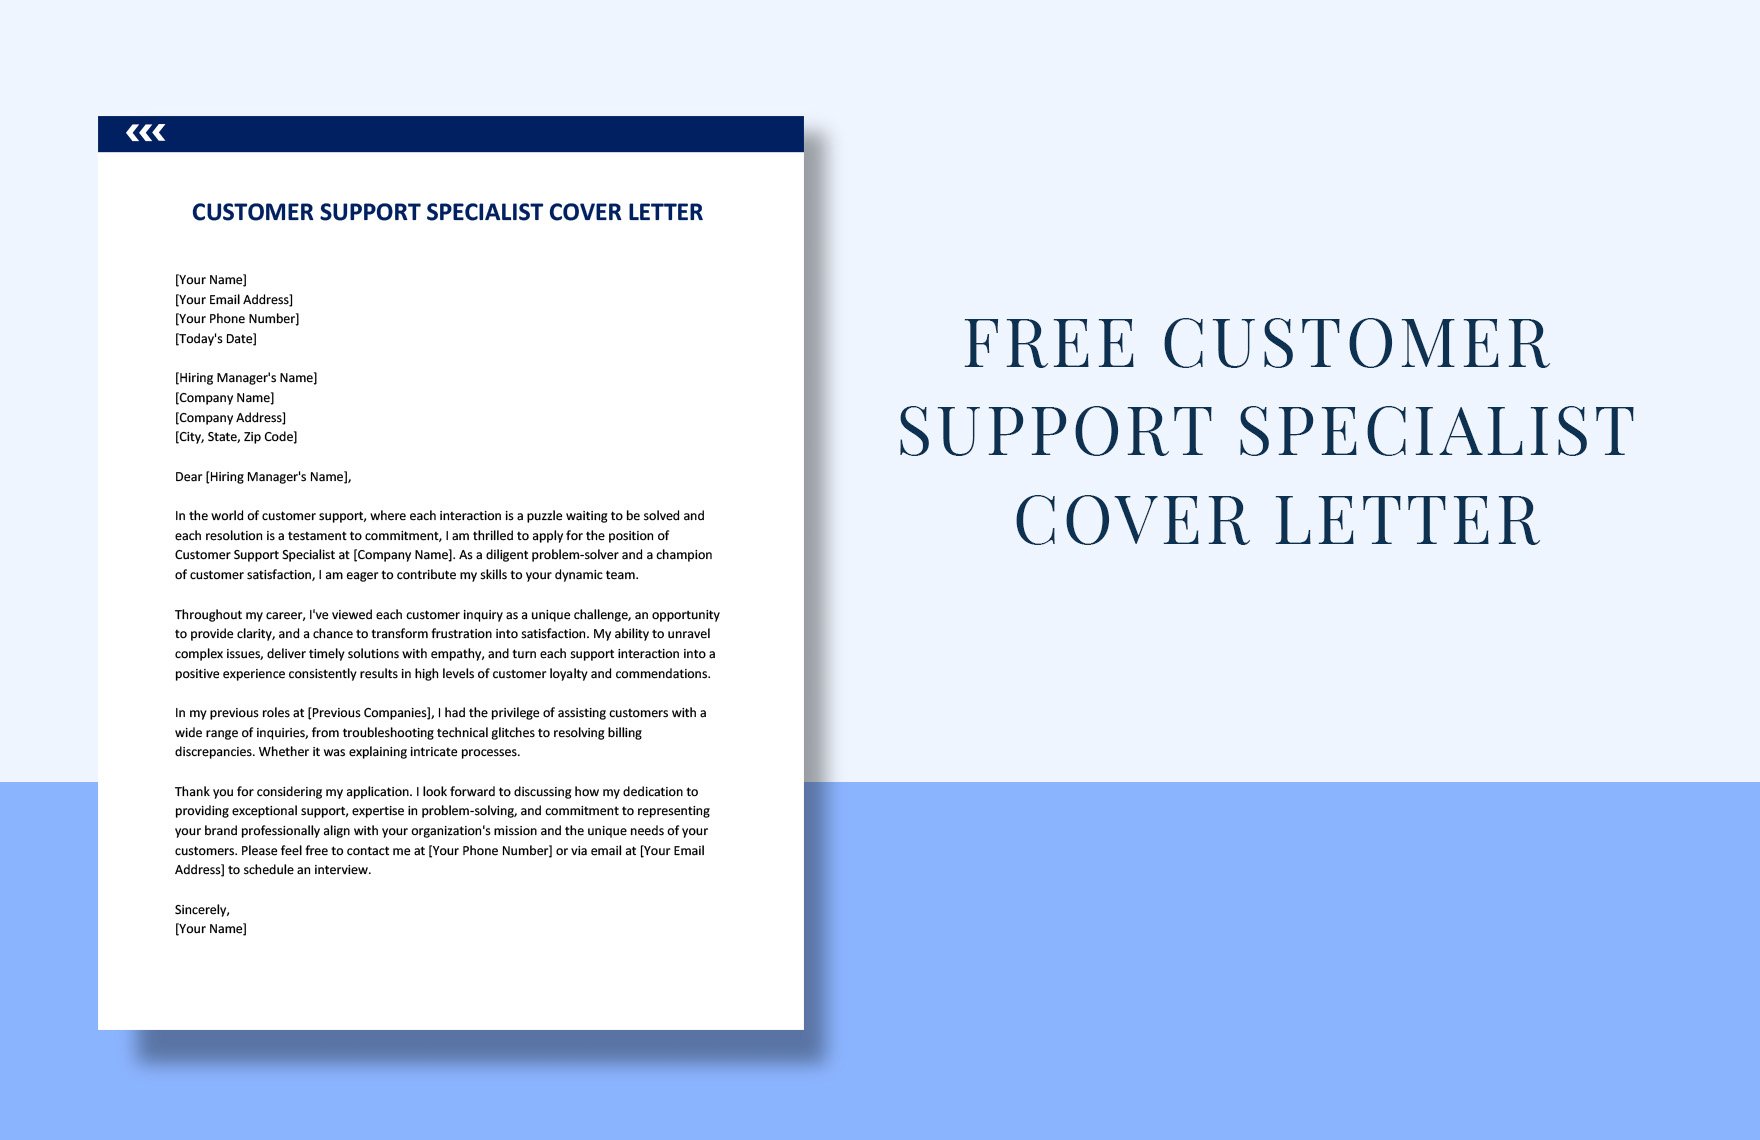 Customer Support Specialist Cover Letter